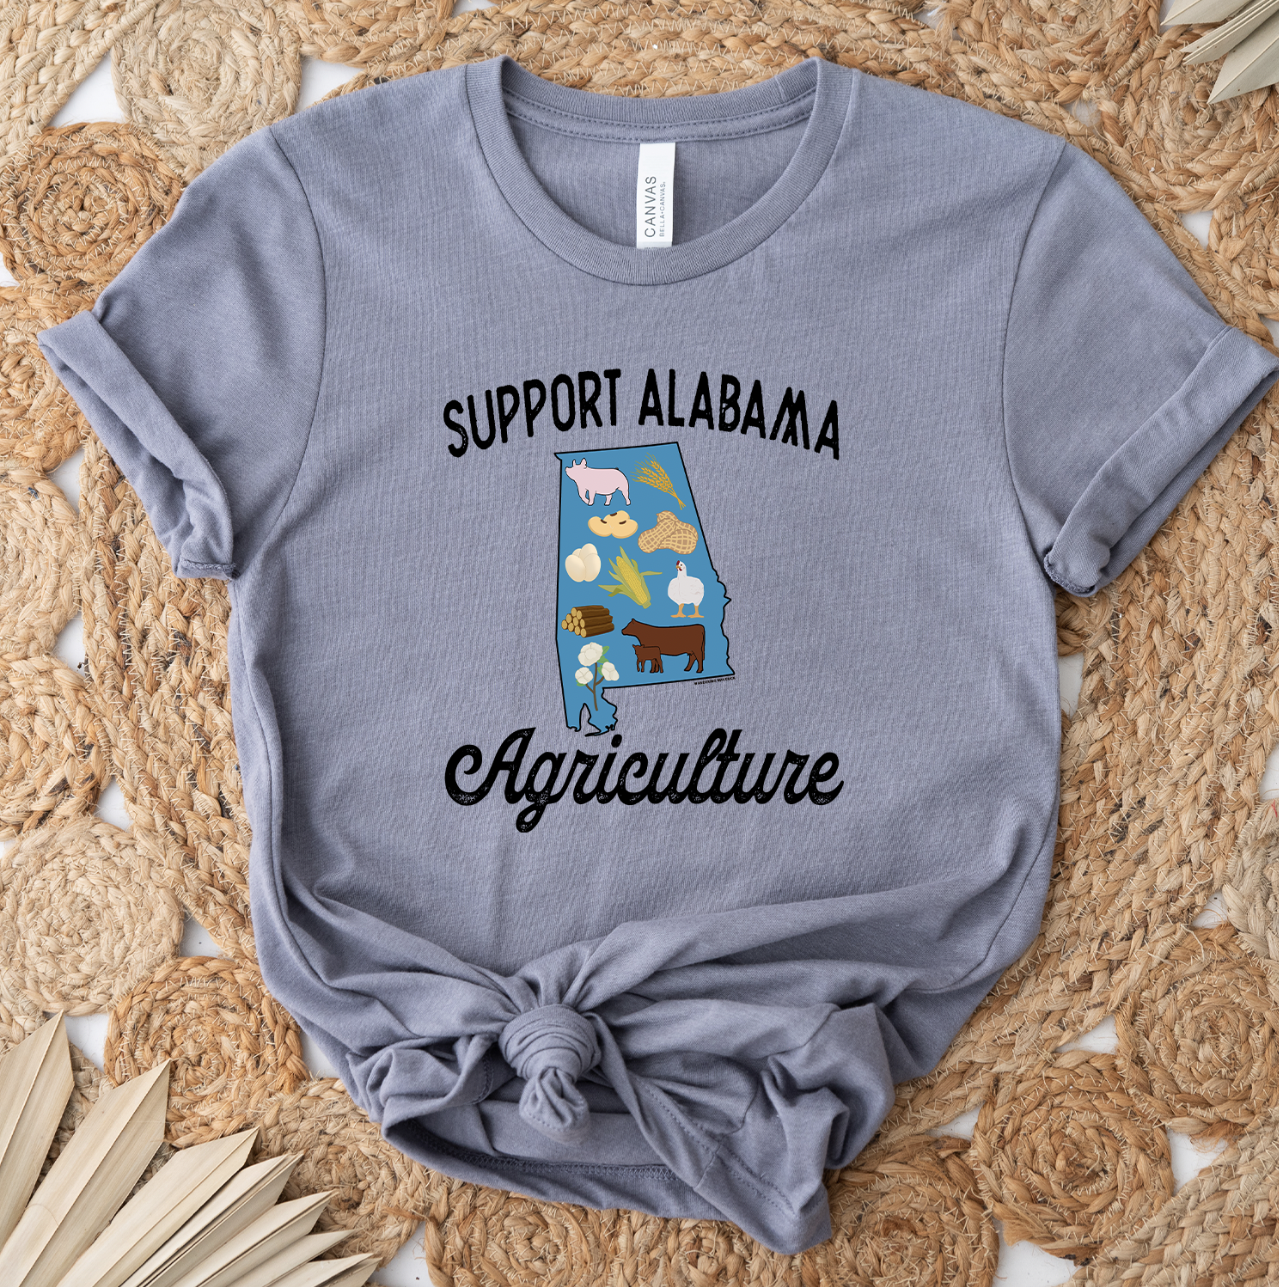 Support Alabama Agriculture T-Shirt (XS-4XL) - Multiple Colors!